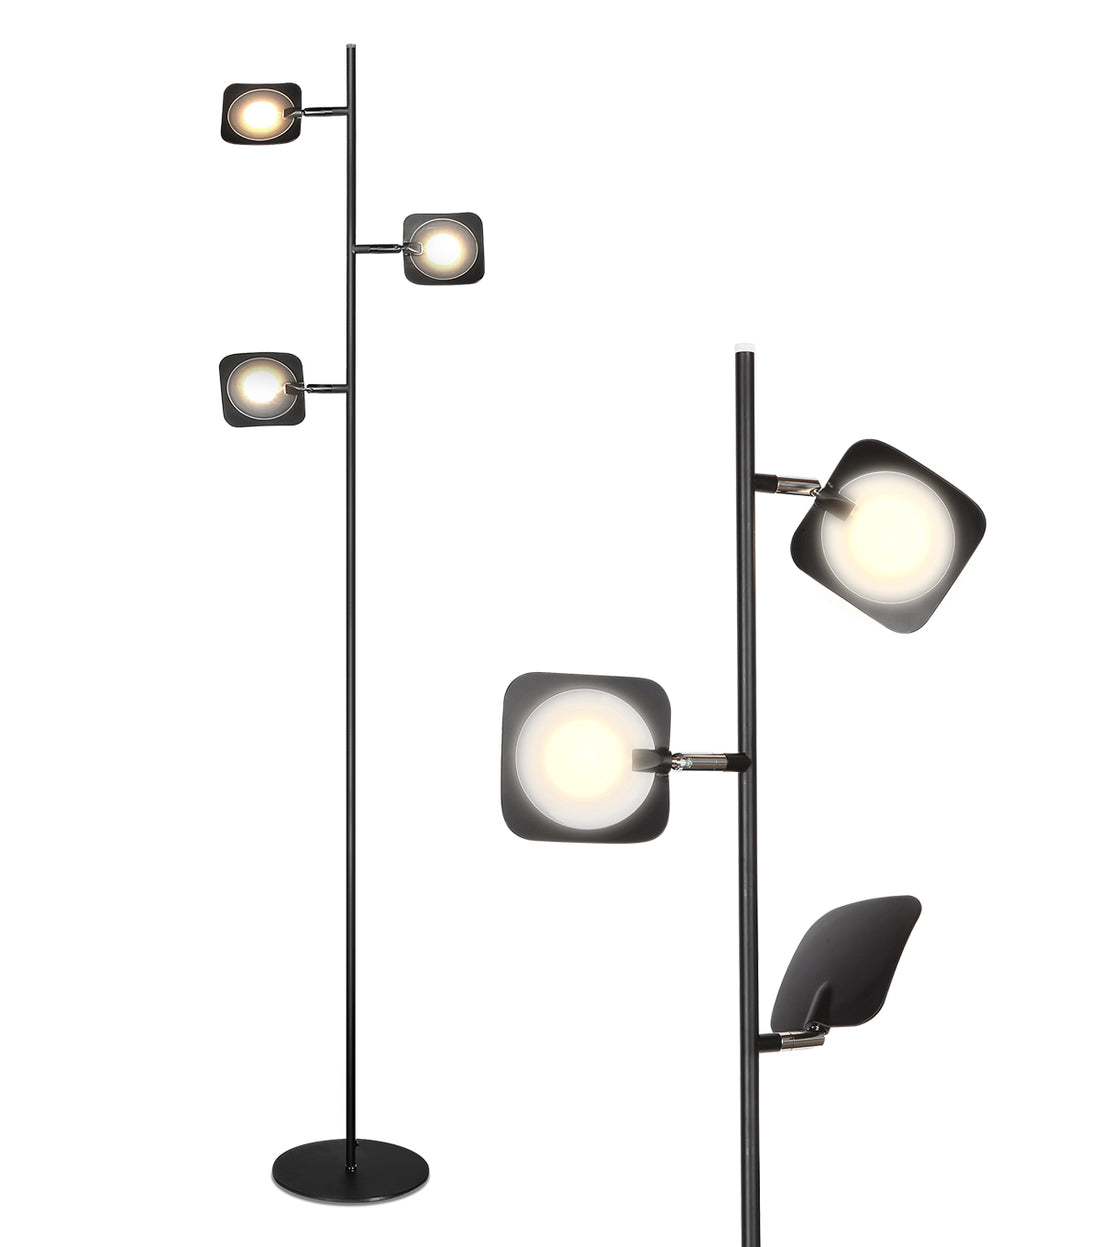 Brightech Tree Spotlight LED Floor Lamp - Very Bright Reading, Craft and Makeup 3 Light Standing Pole - Modern Dimmable & Adjustable Panels, Minimal Space Use